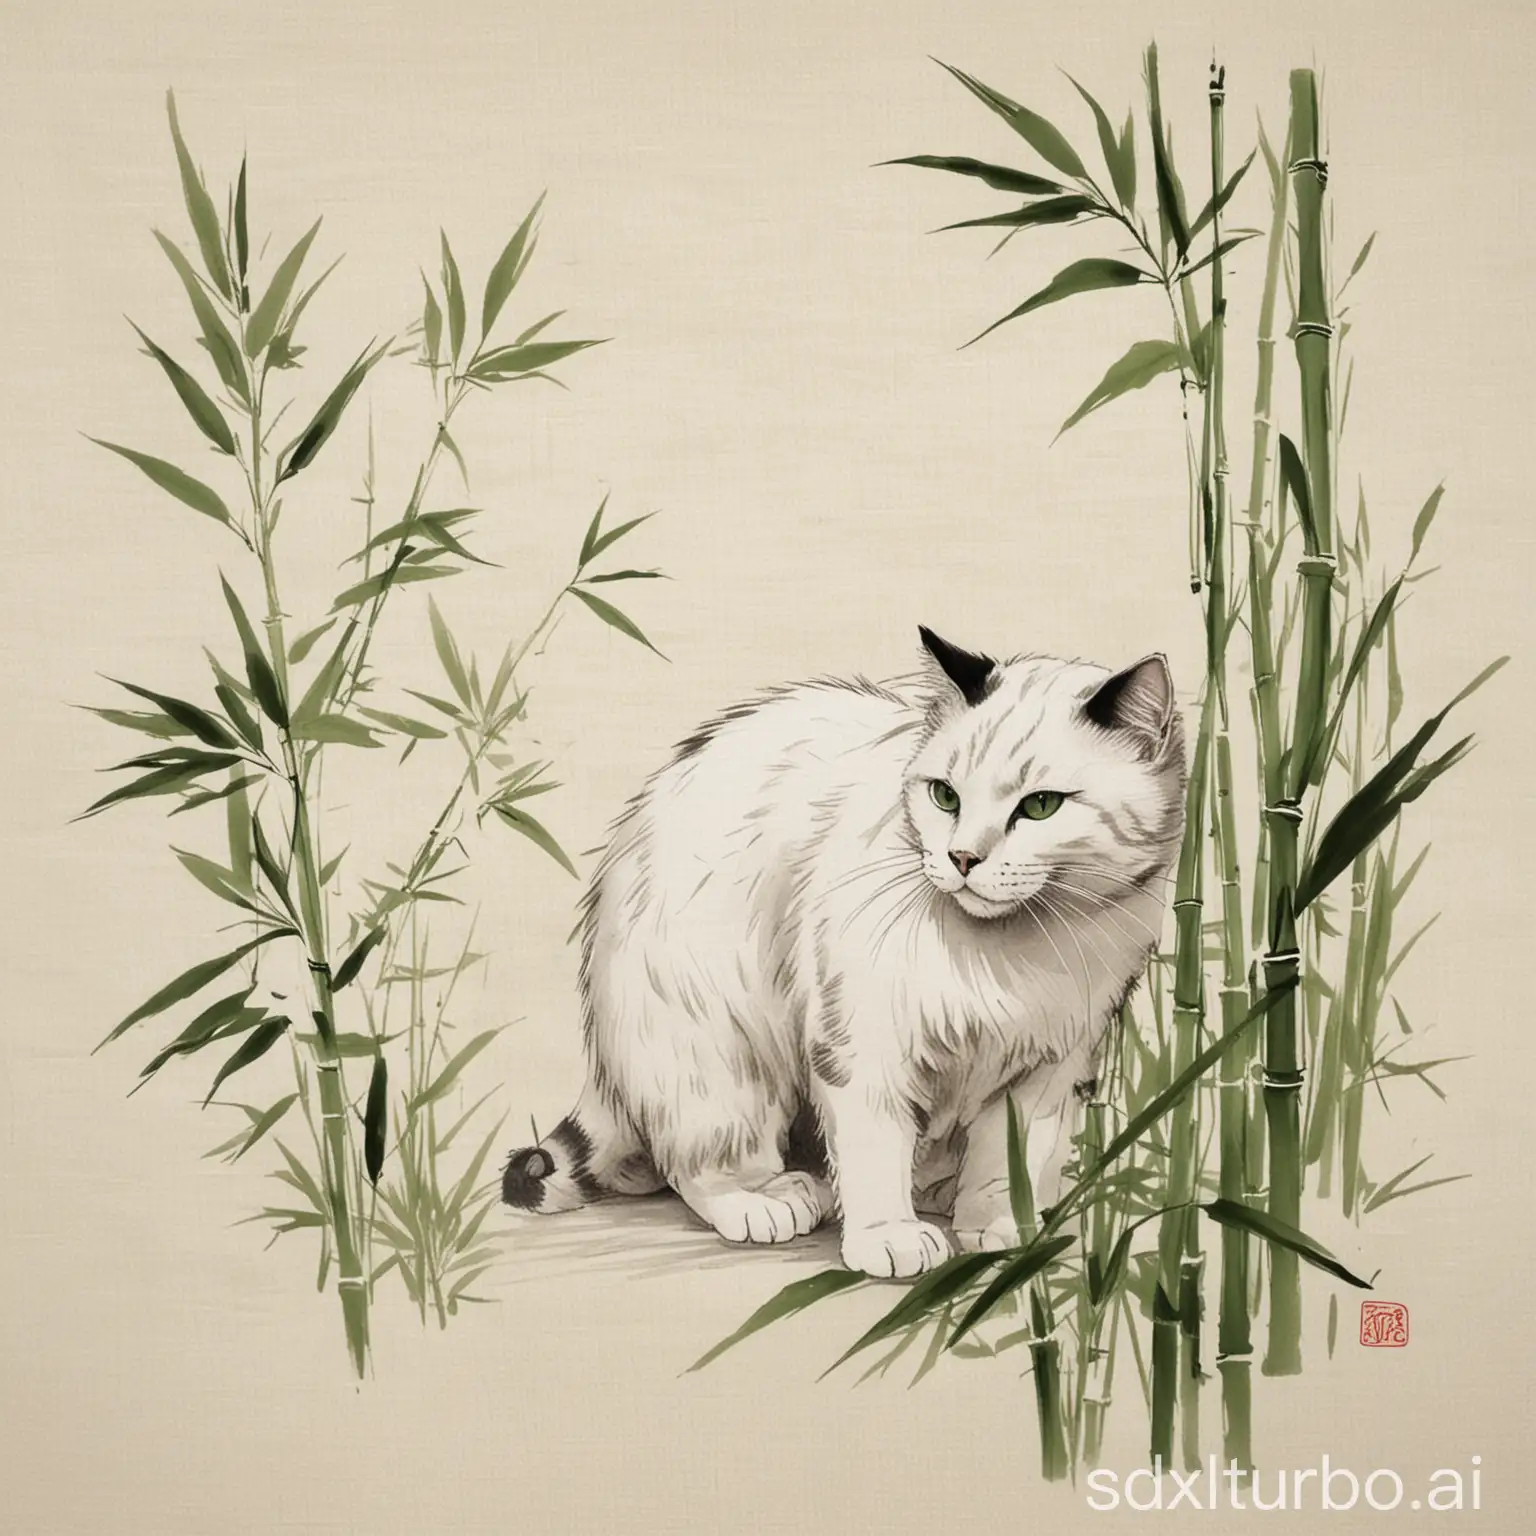 Sumie-Bamboo-and-Cat-Artwork-on-White-Cloth